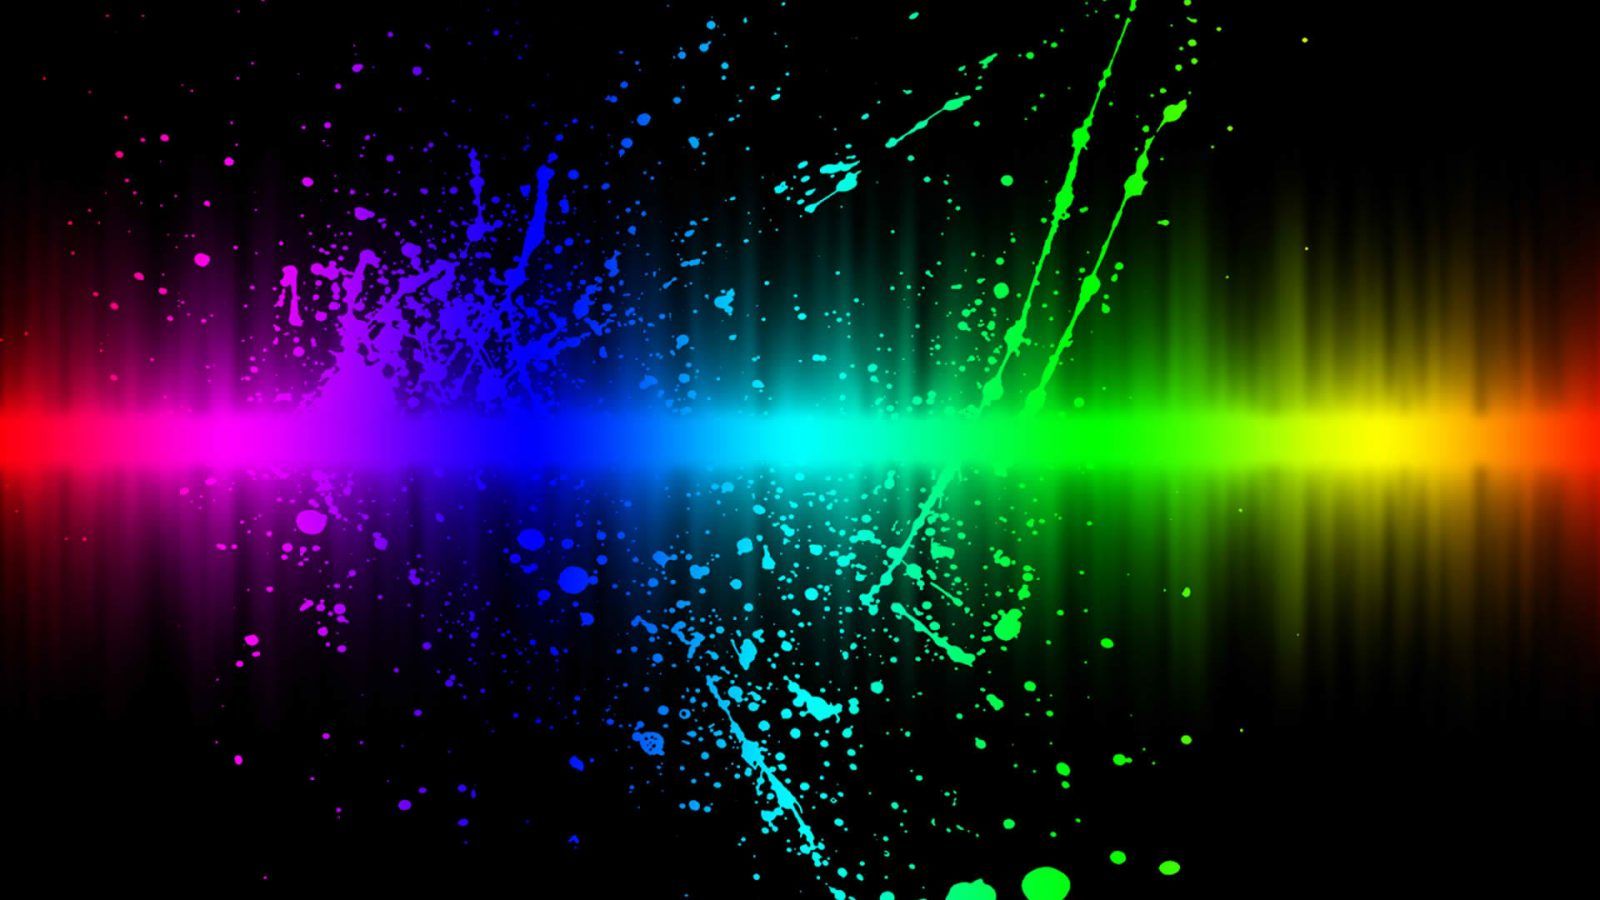 Abstract Wallpaper For Windows 10. Rainbow wallpaper, Cool desktop background, Cool background